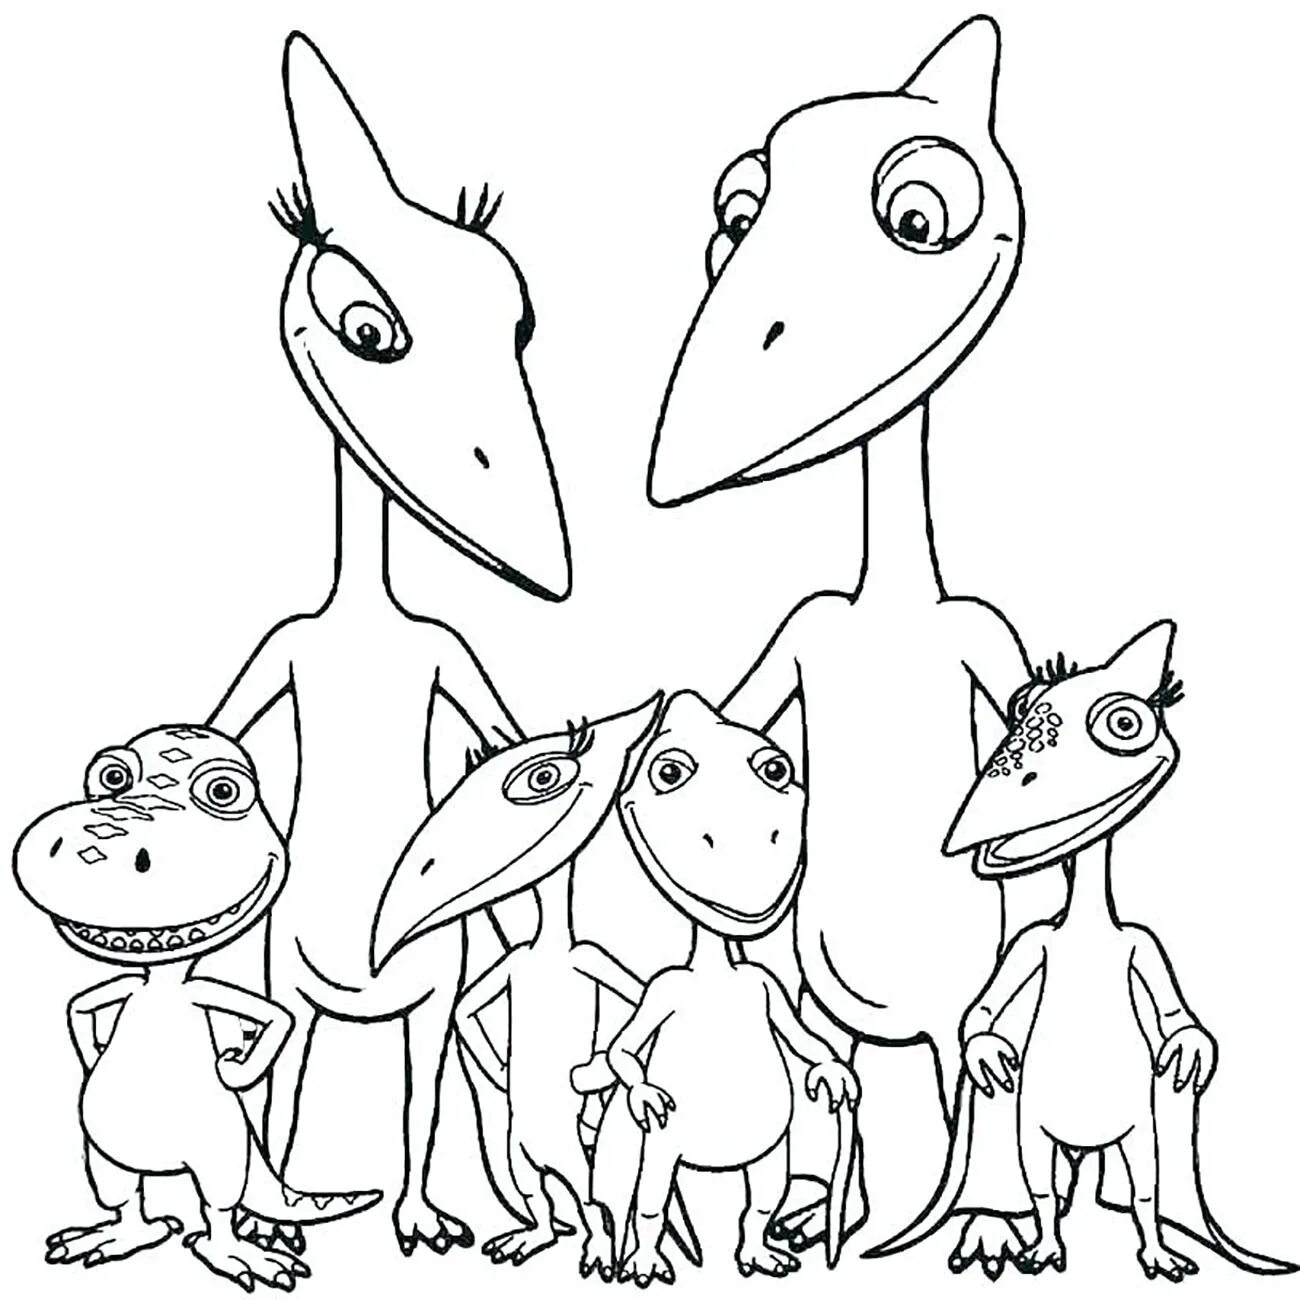 Fancy dinosaurs coloring book